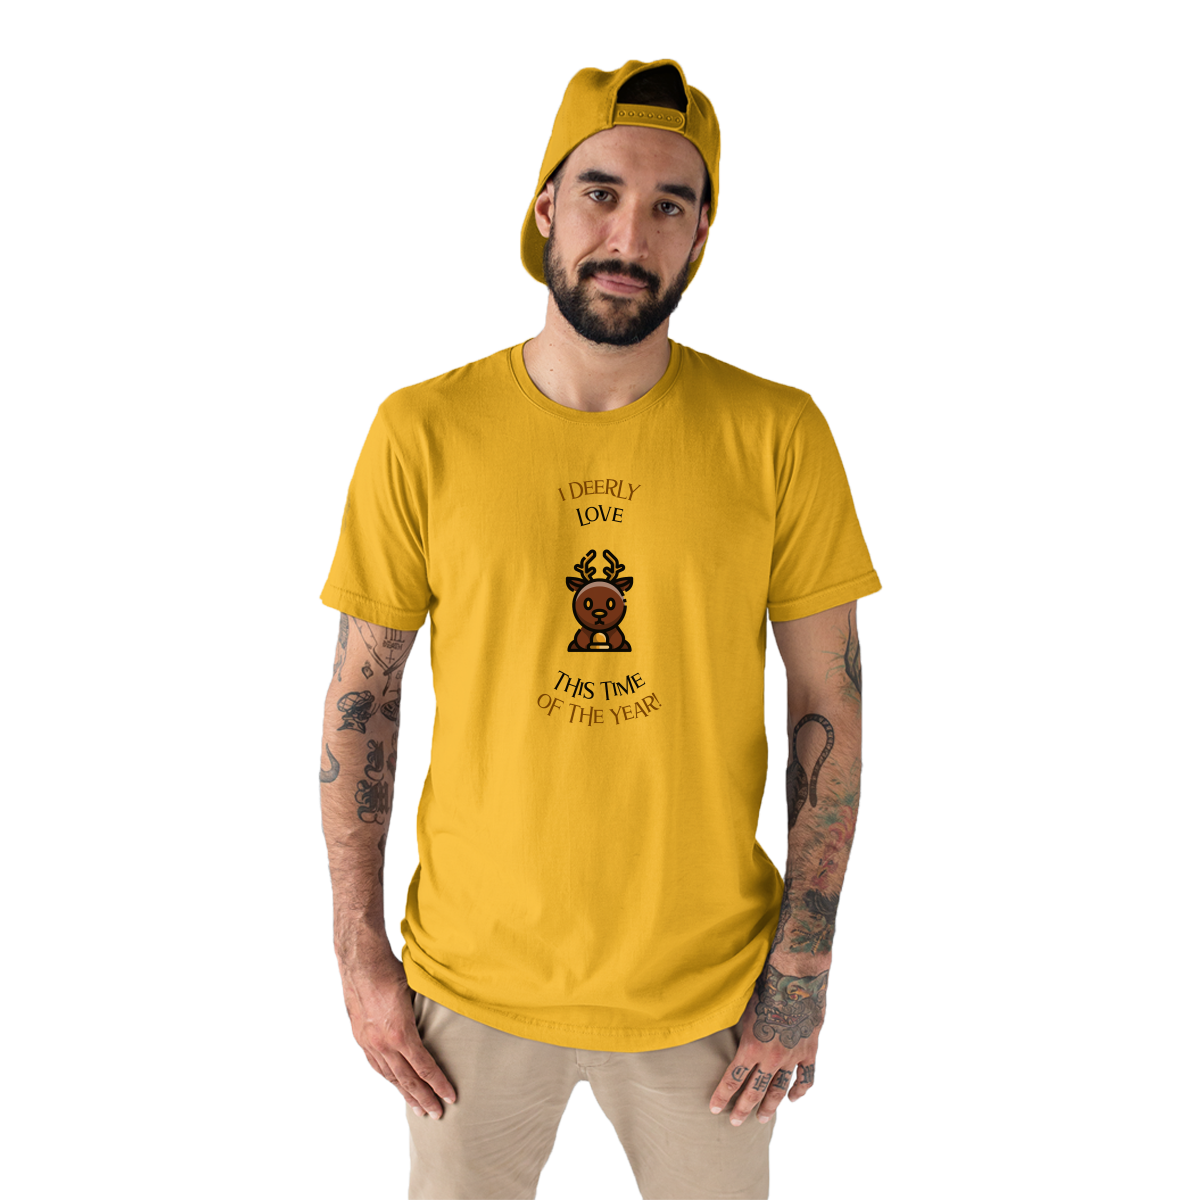 I Deerly Love This Time of the Year! Men's T-shirt | Yellow